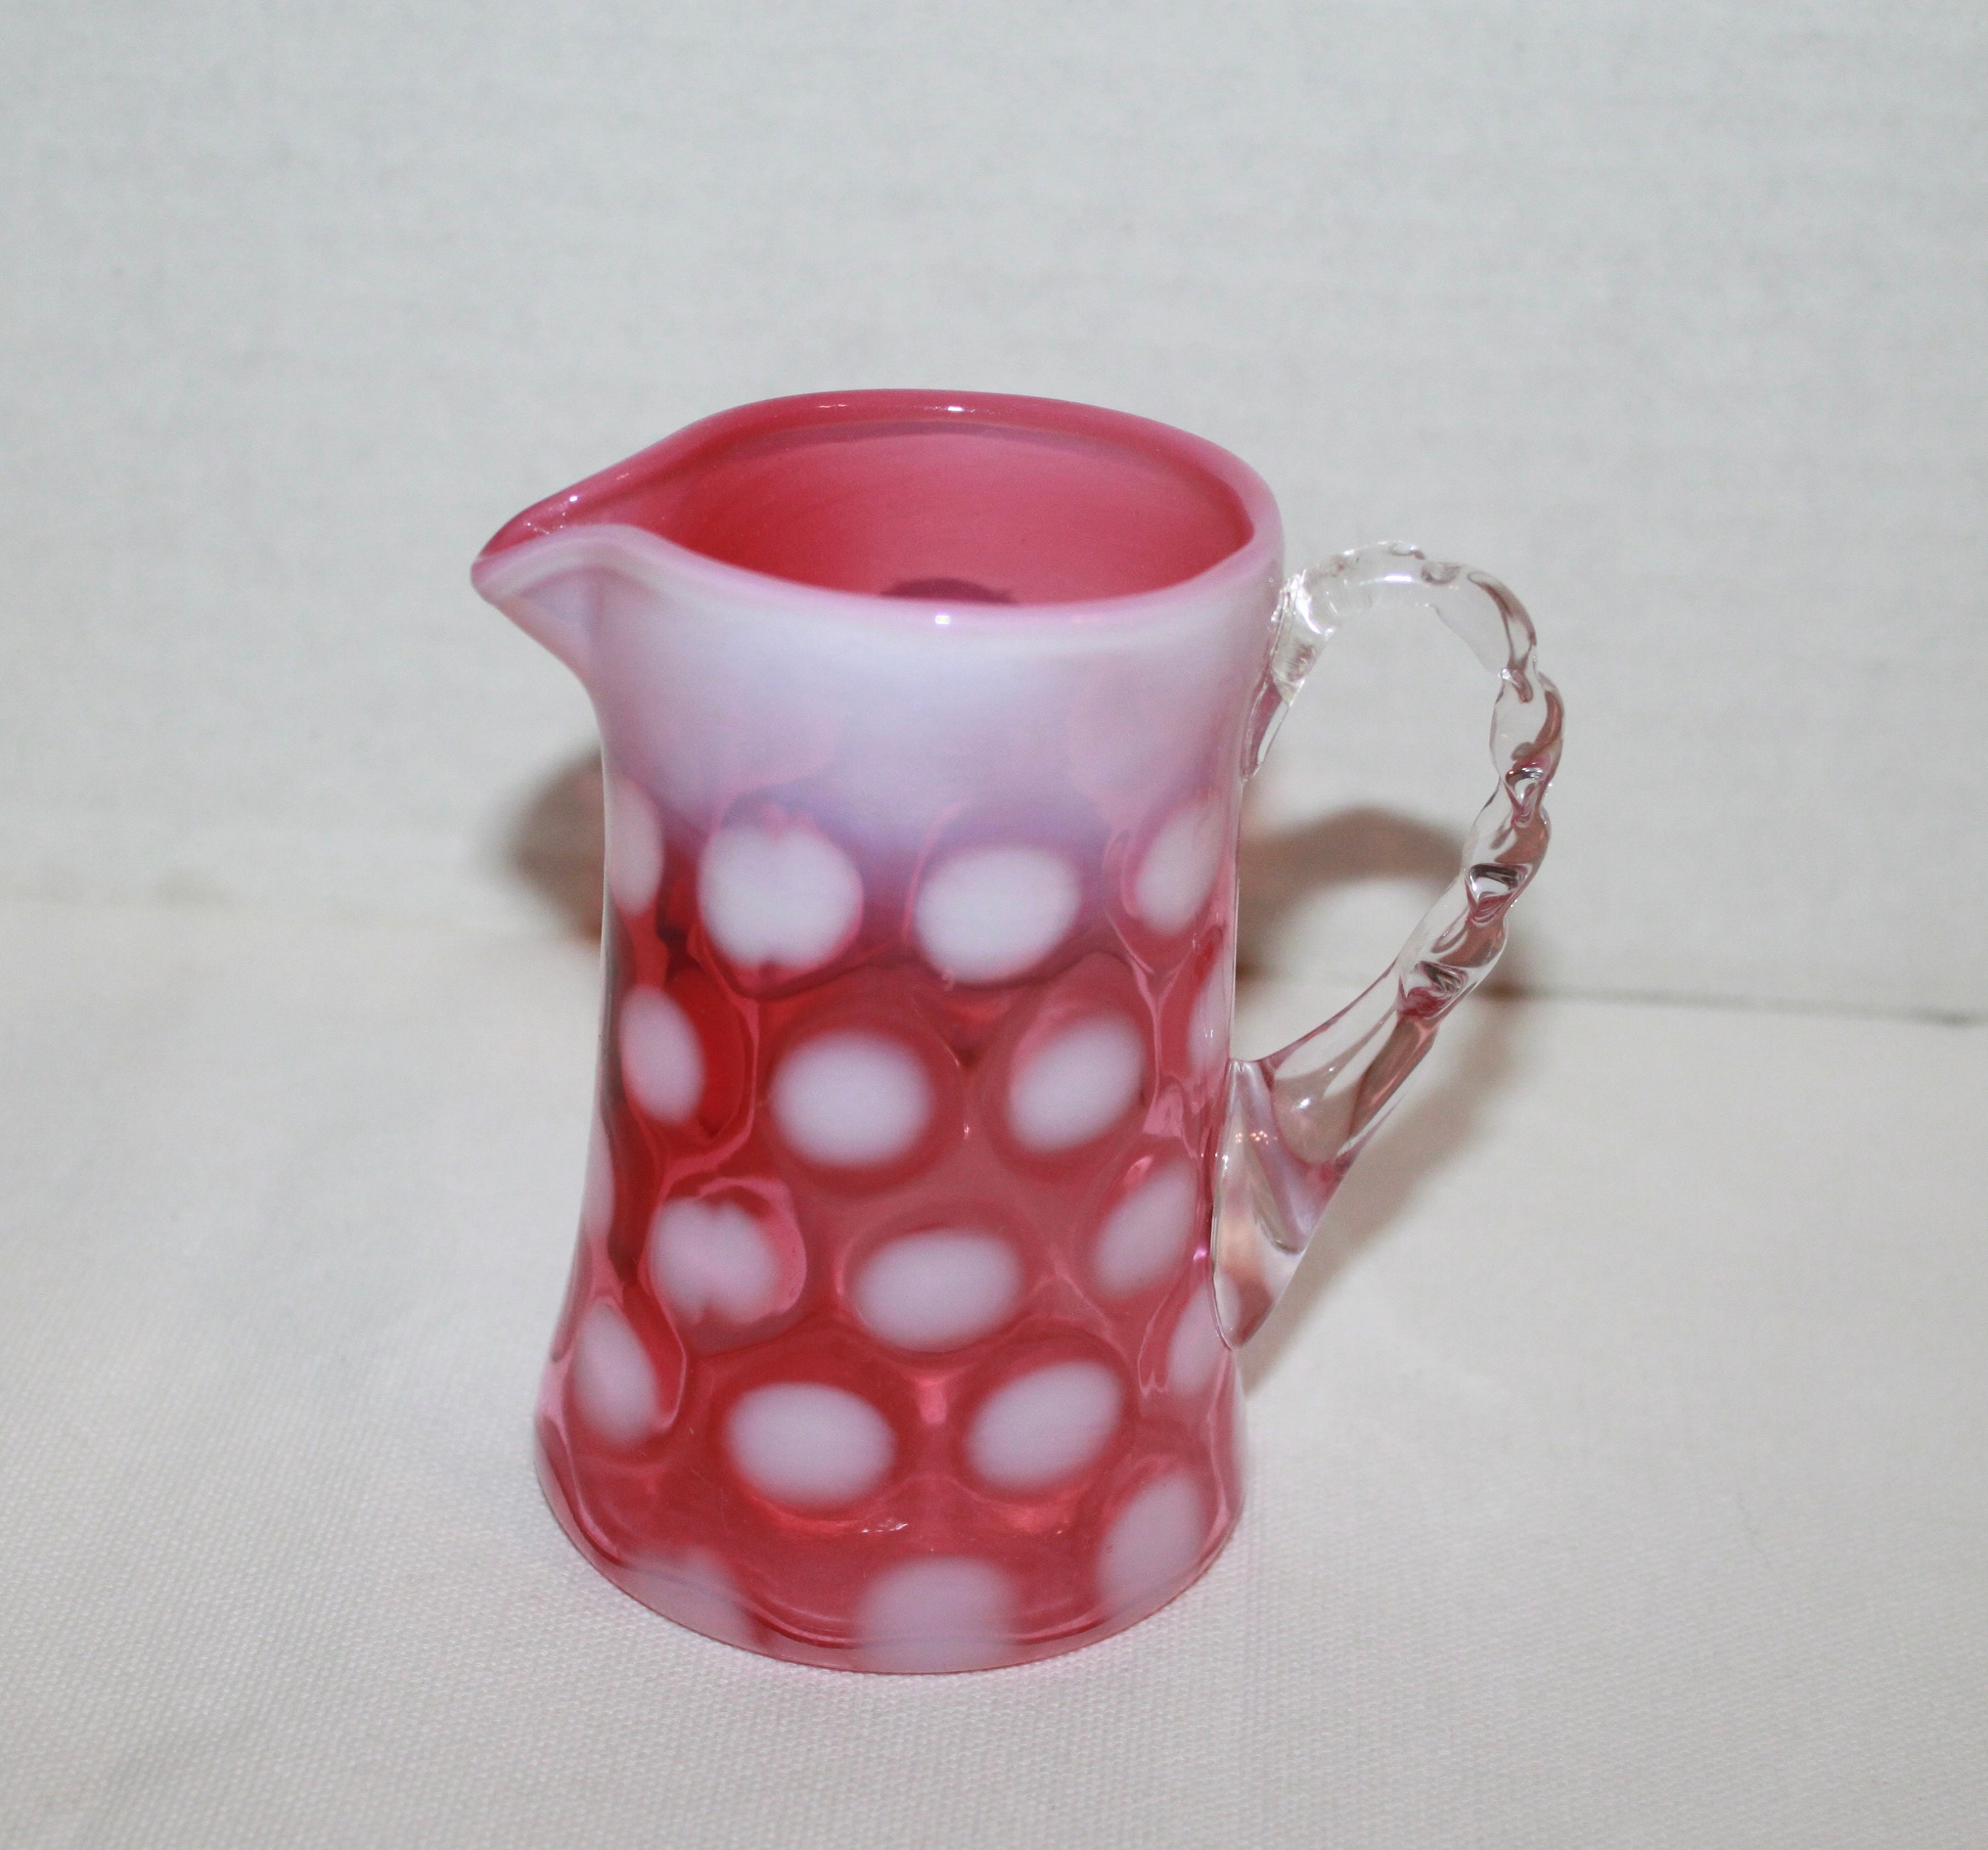 Pink Metal Pitcher – Now and Then of Rockmart, Inc